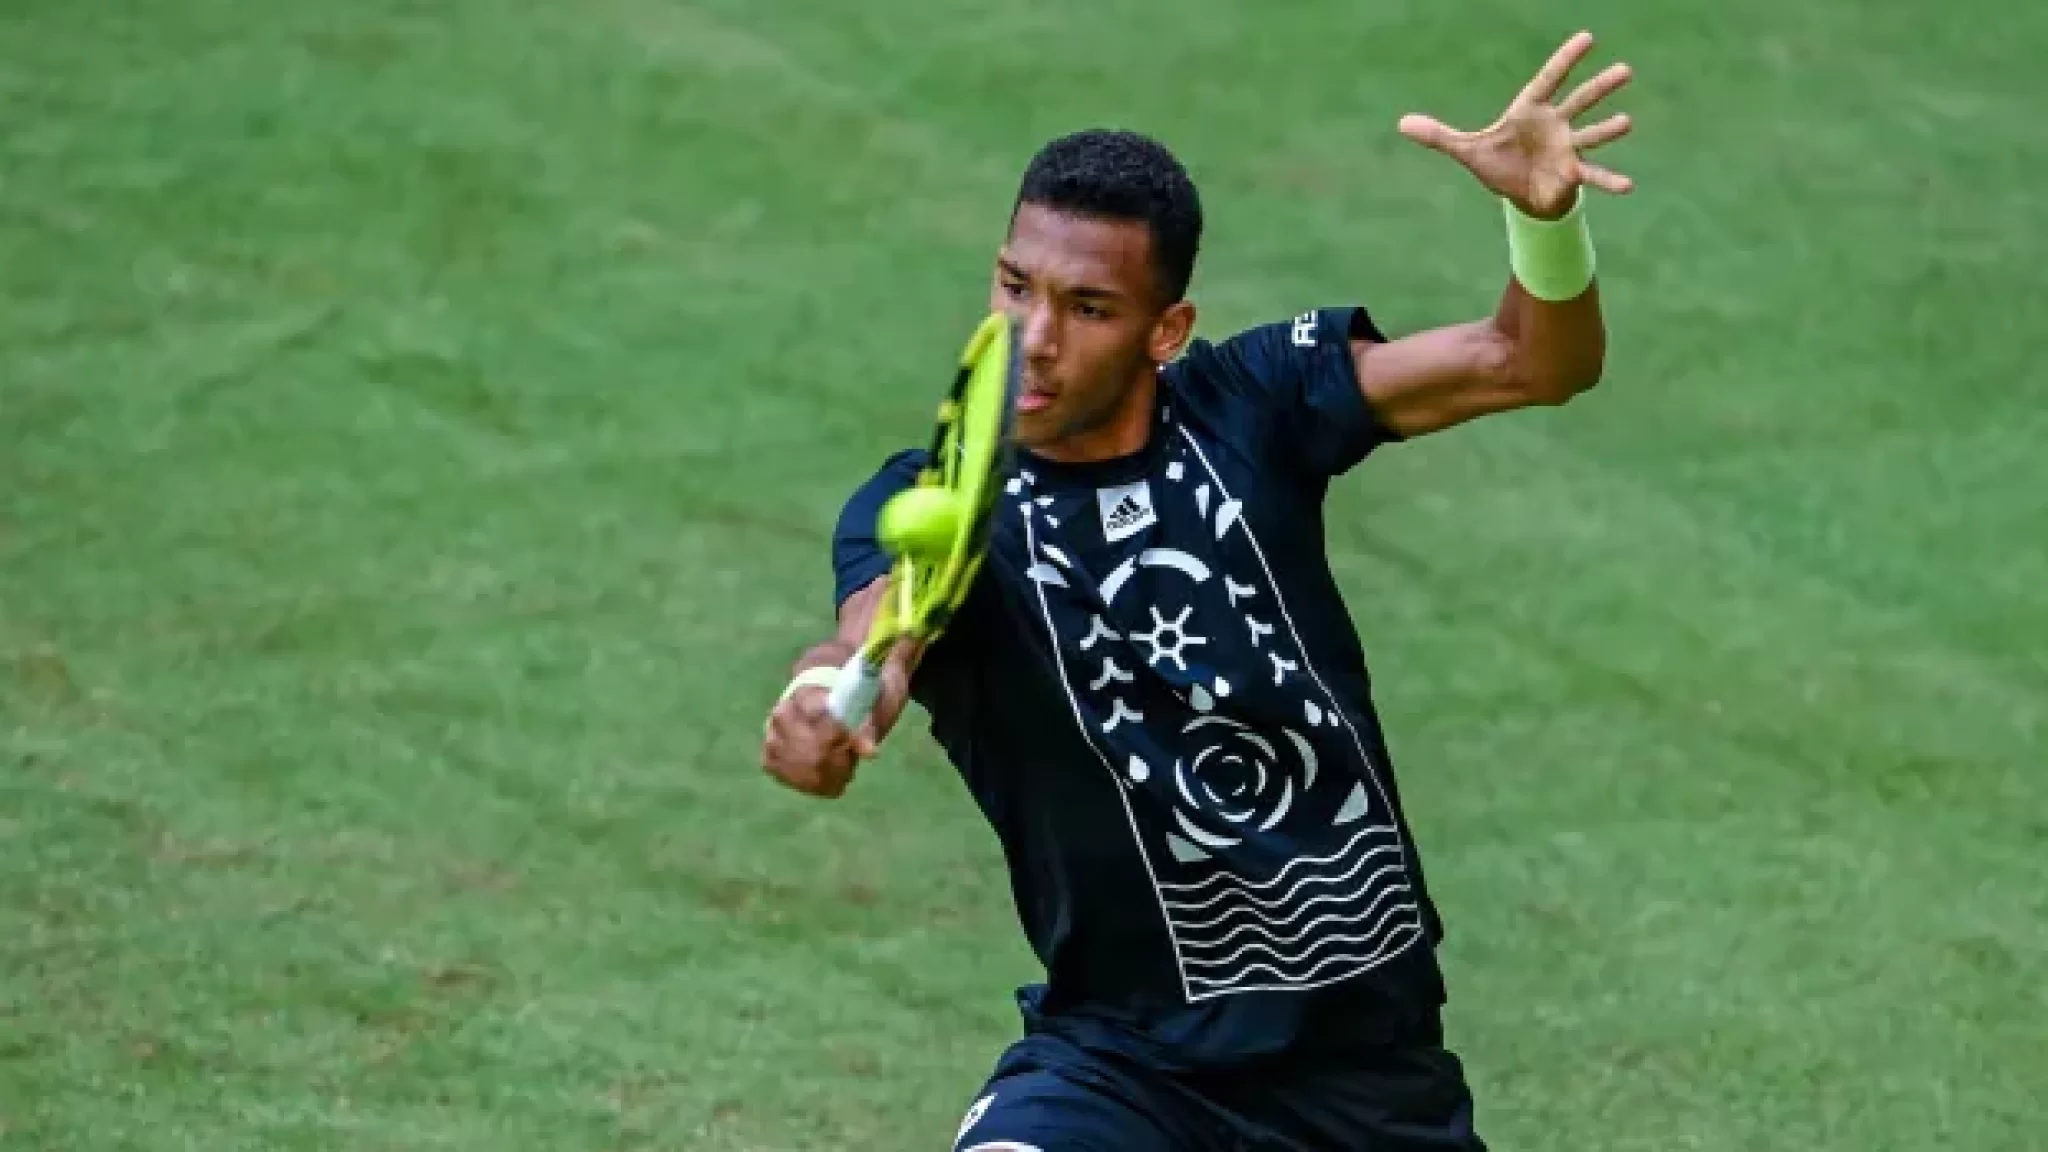 Canada’s Felix Auger-Aliassime lands 6th seed at Wimbledon